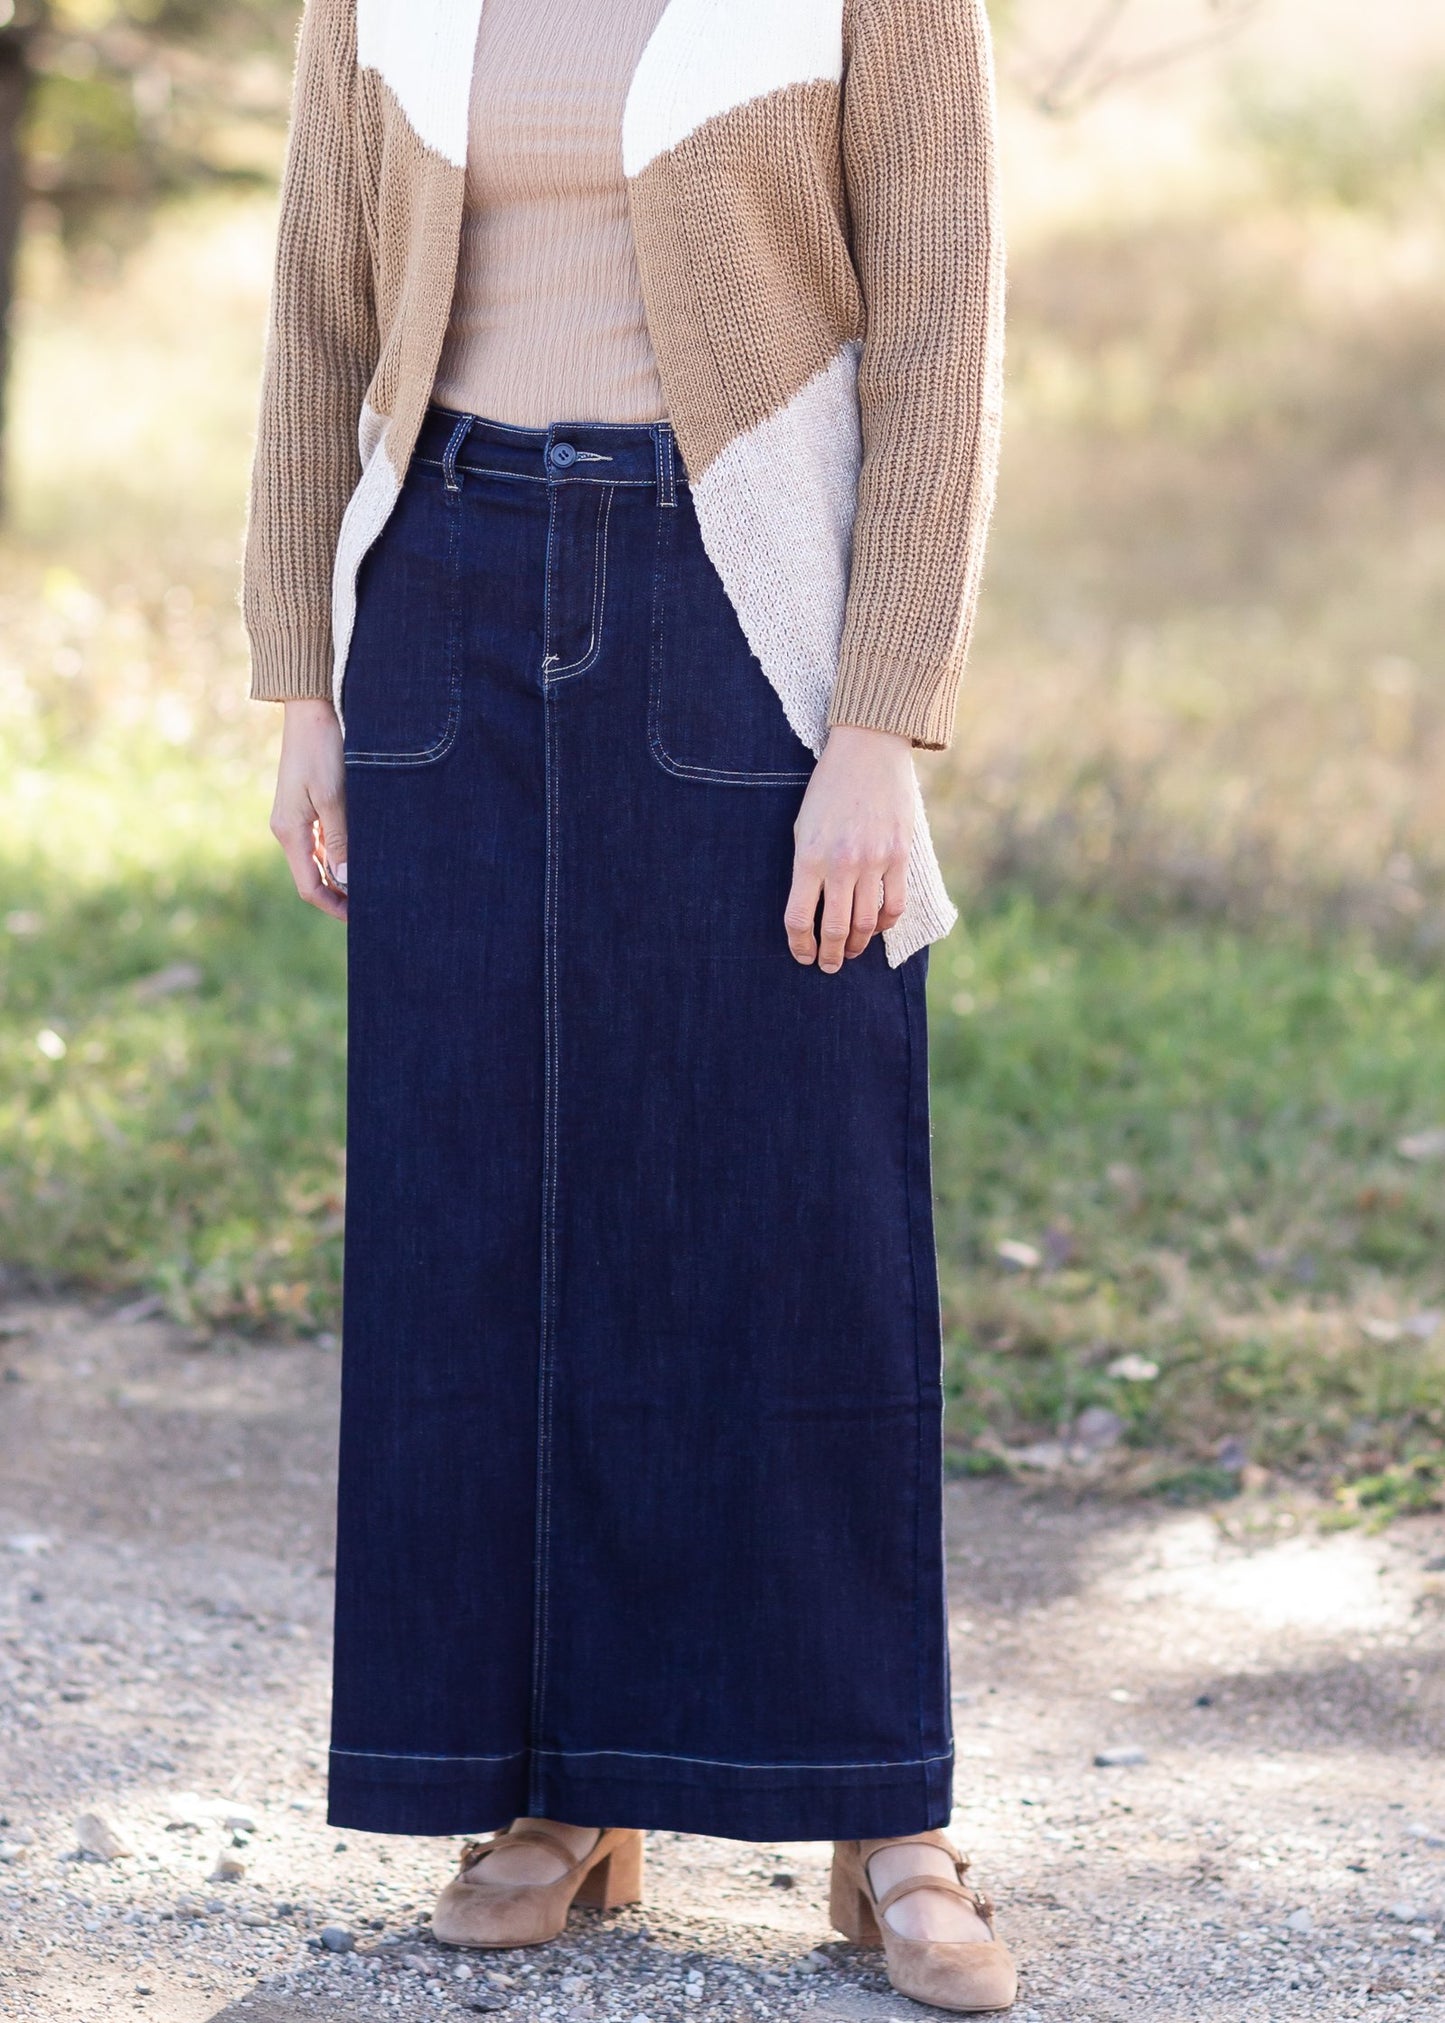 The Esther is a straight fit long denim skirt, with contrasting stitching with patch pockets.The Esther is a straight fit long denim skirt, with contrasting stitching with patch pockets.